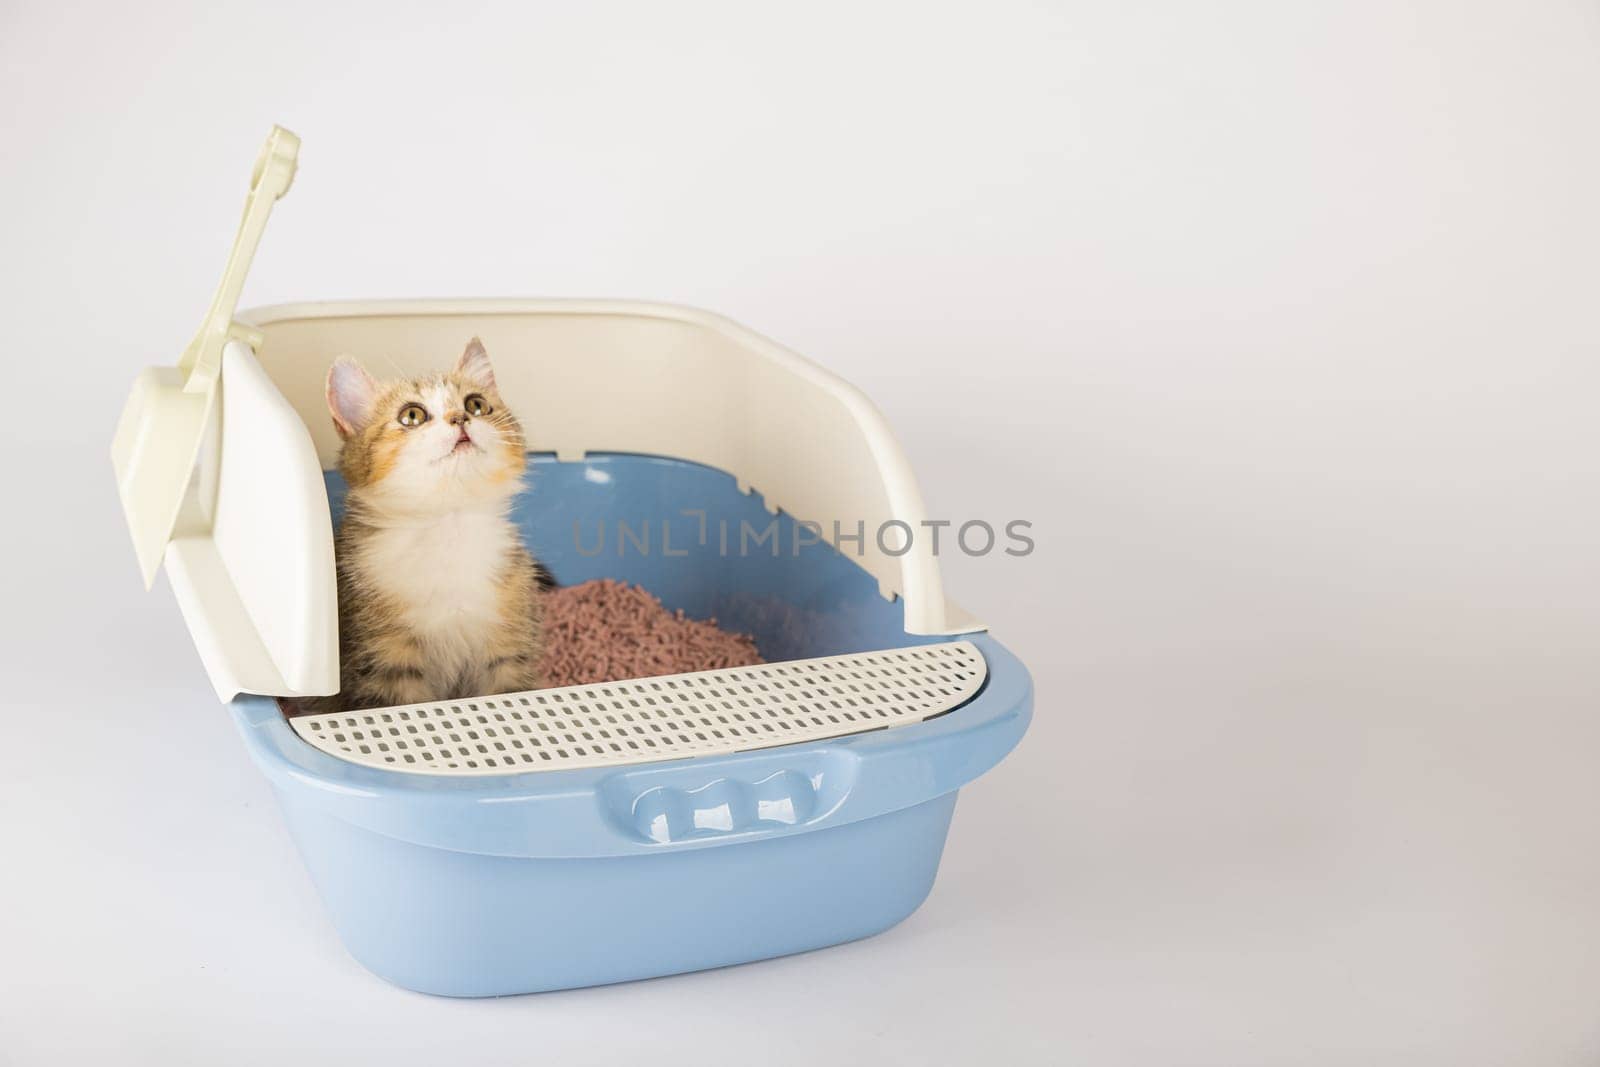 The cat's hygiene and care are in focus as it occupies a litter box in isolation. The cat tray on a clean white background serves as the designated toilet for this feline. by Sorapop